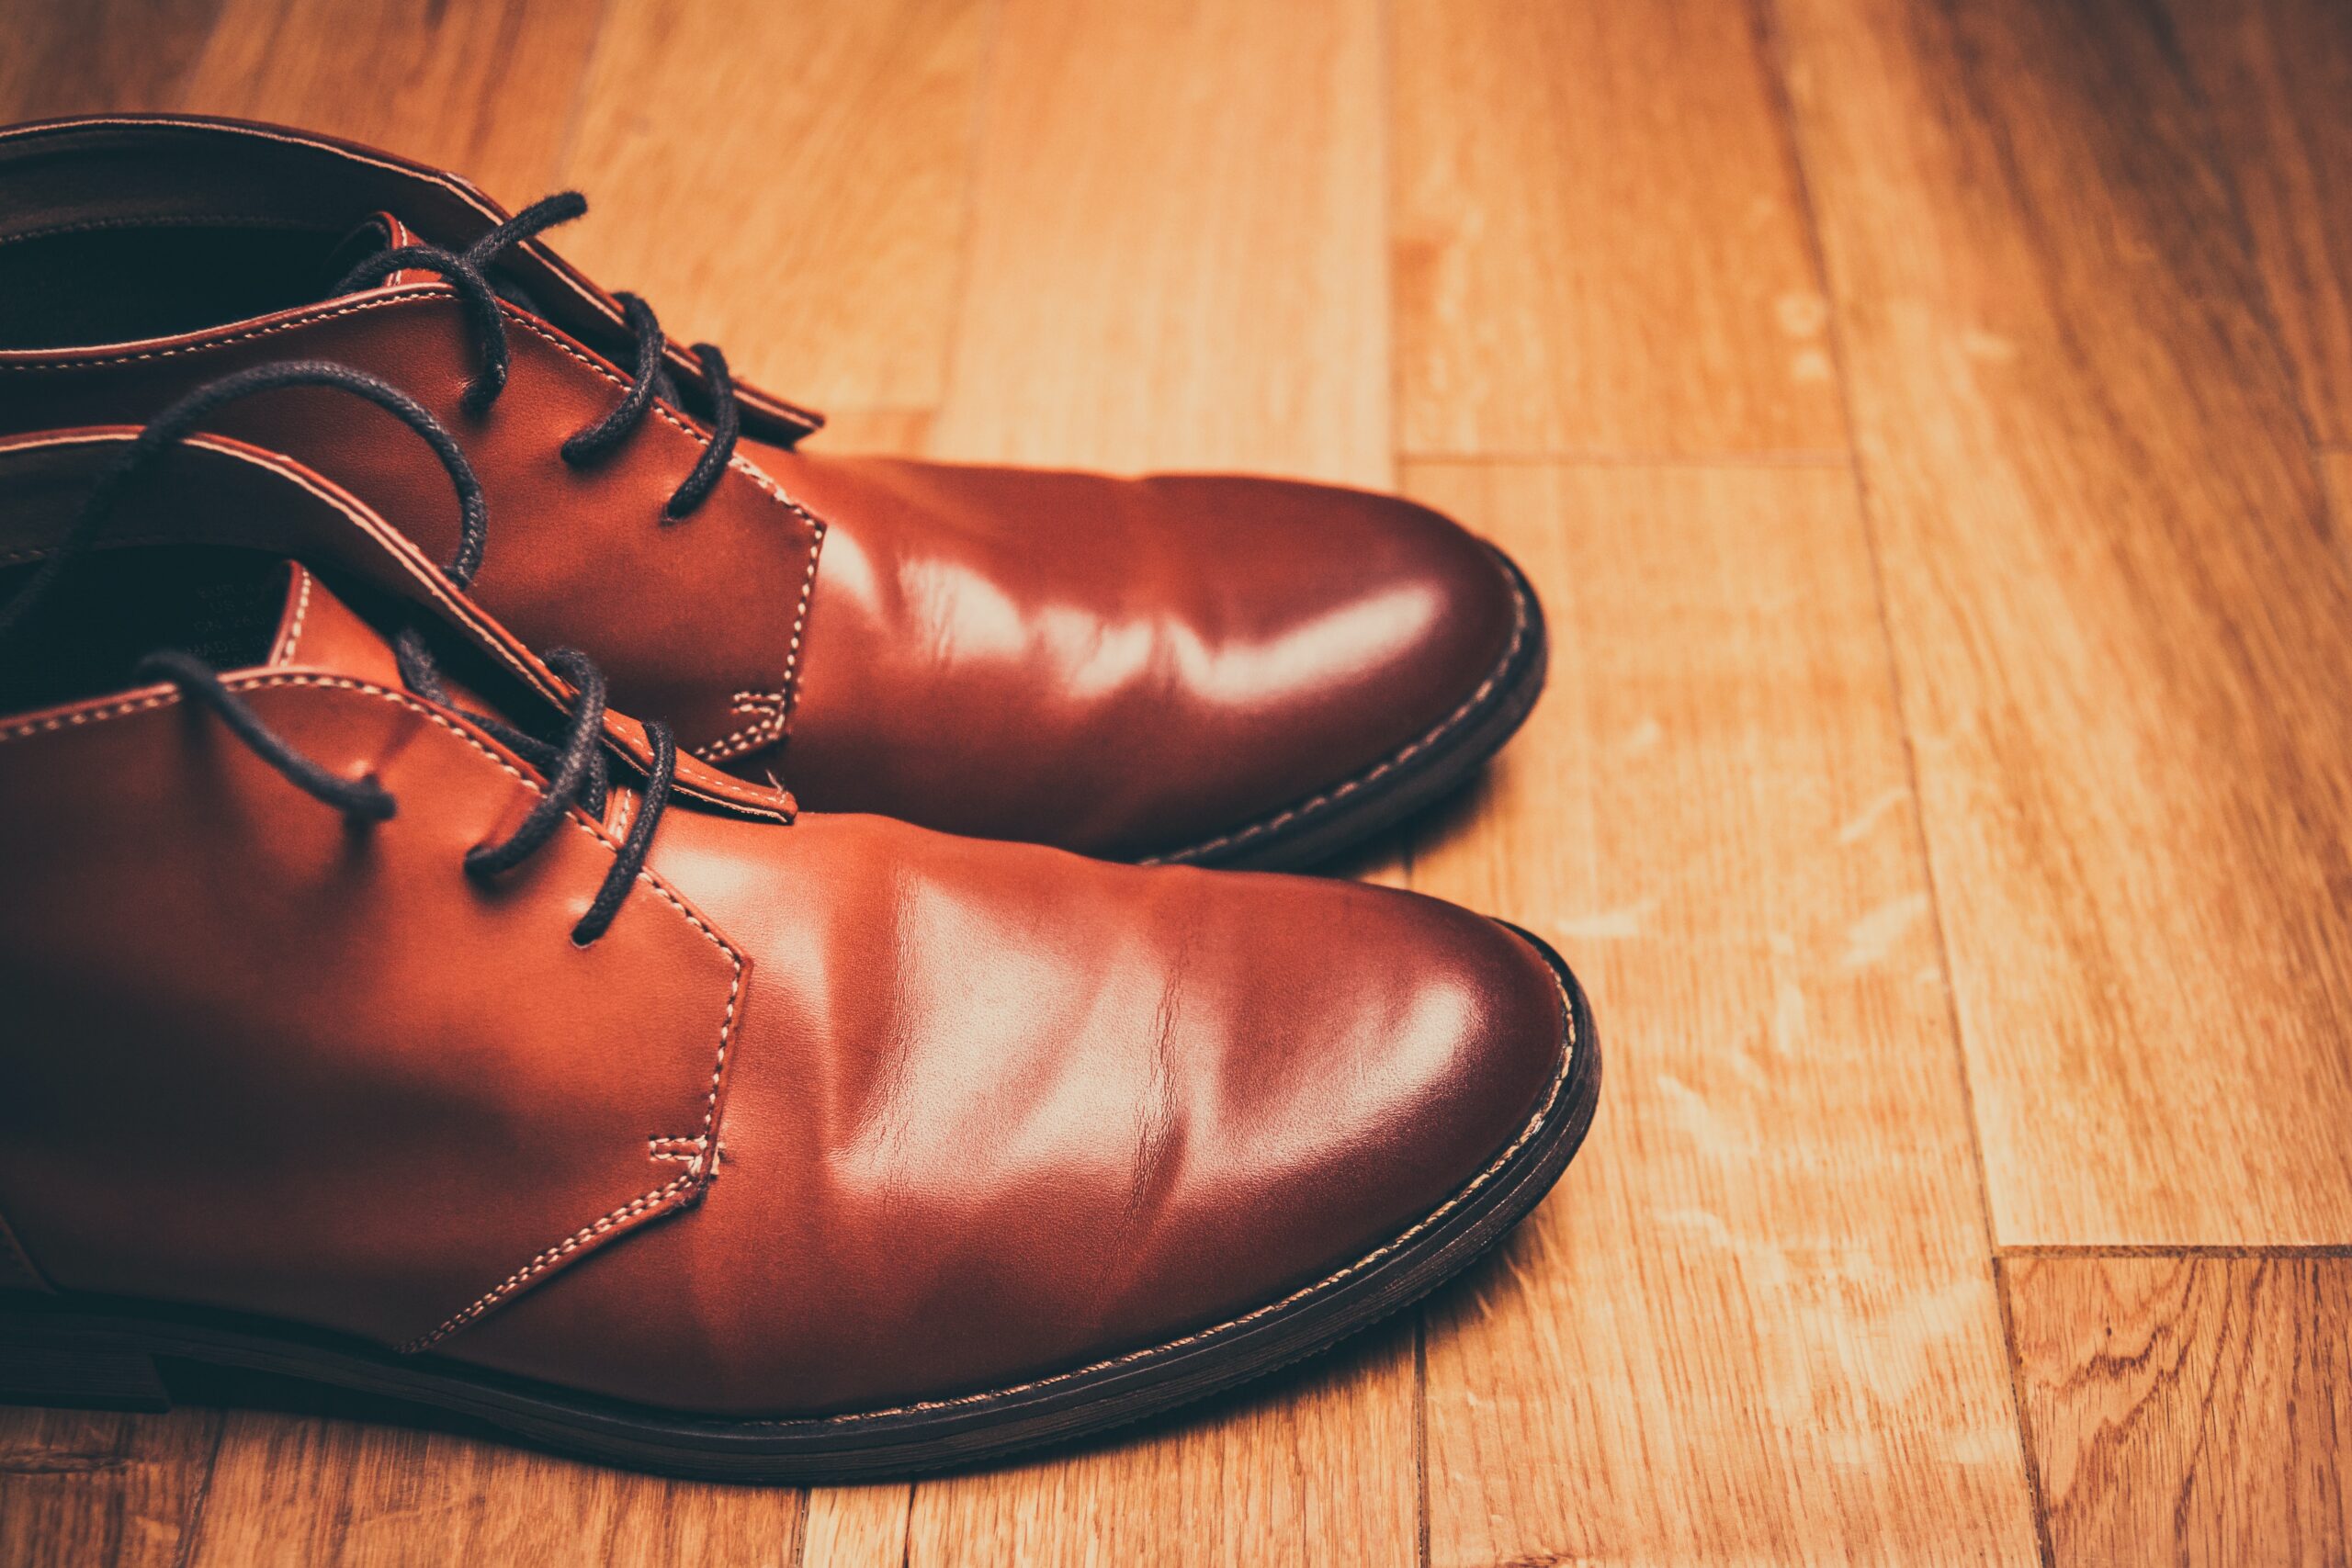 Pair of shiny brown leather shoes sit on a wooden floor